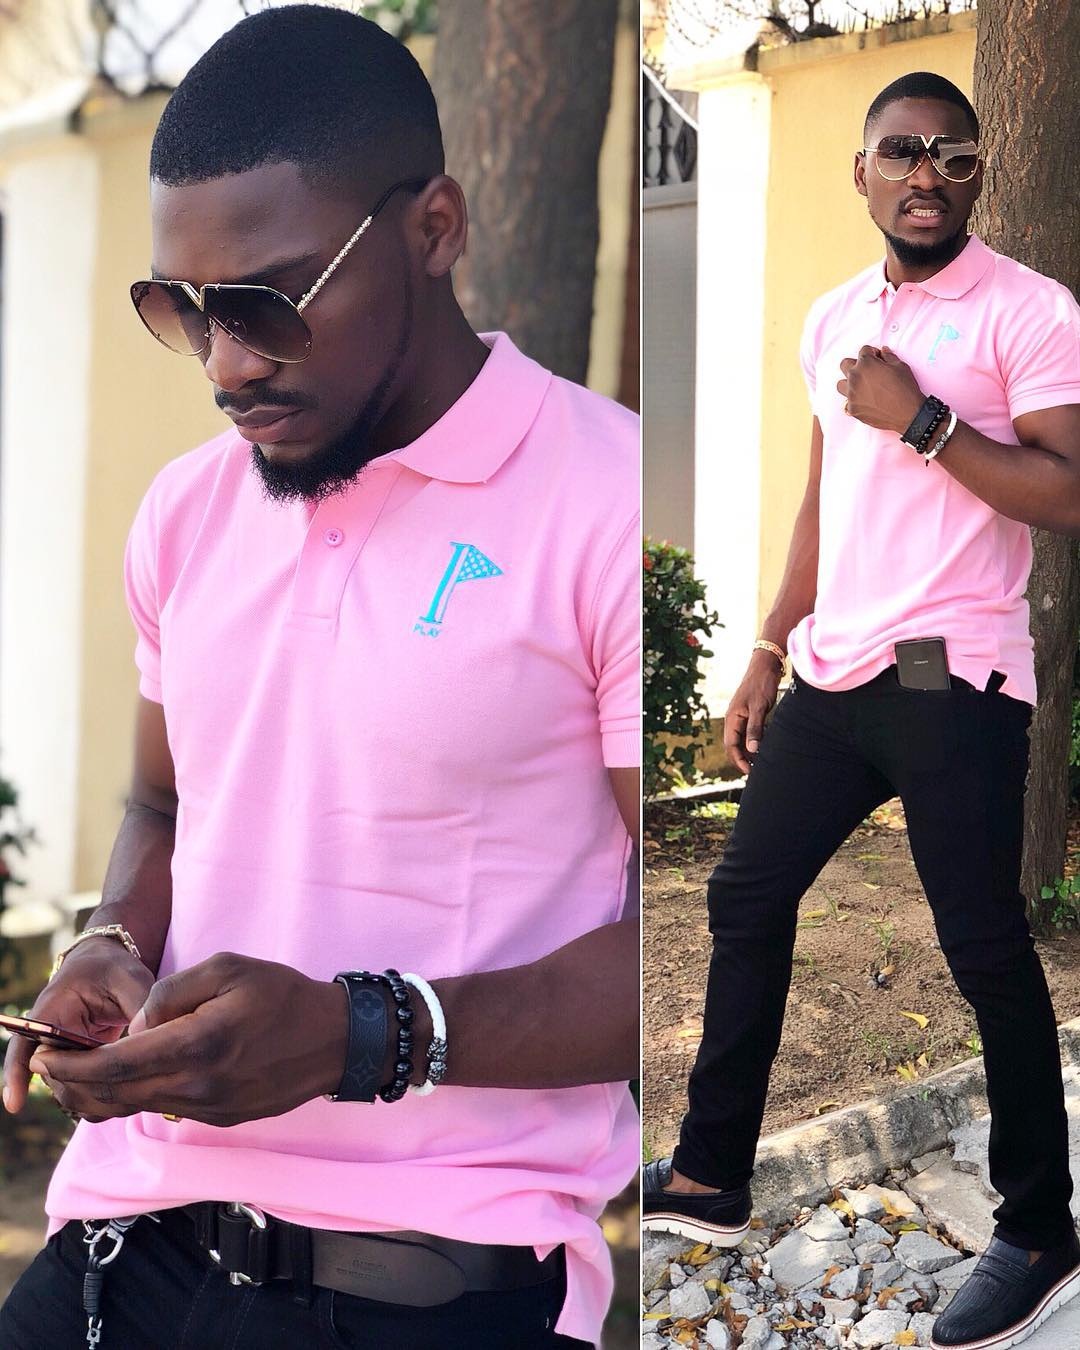 Stop Commenting on Tobi's Picture, Have self respect and worth - Fan advises Alex